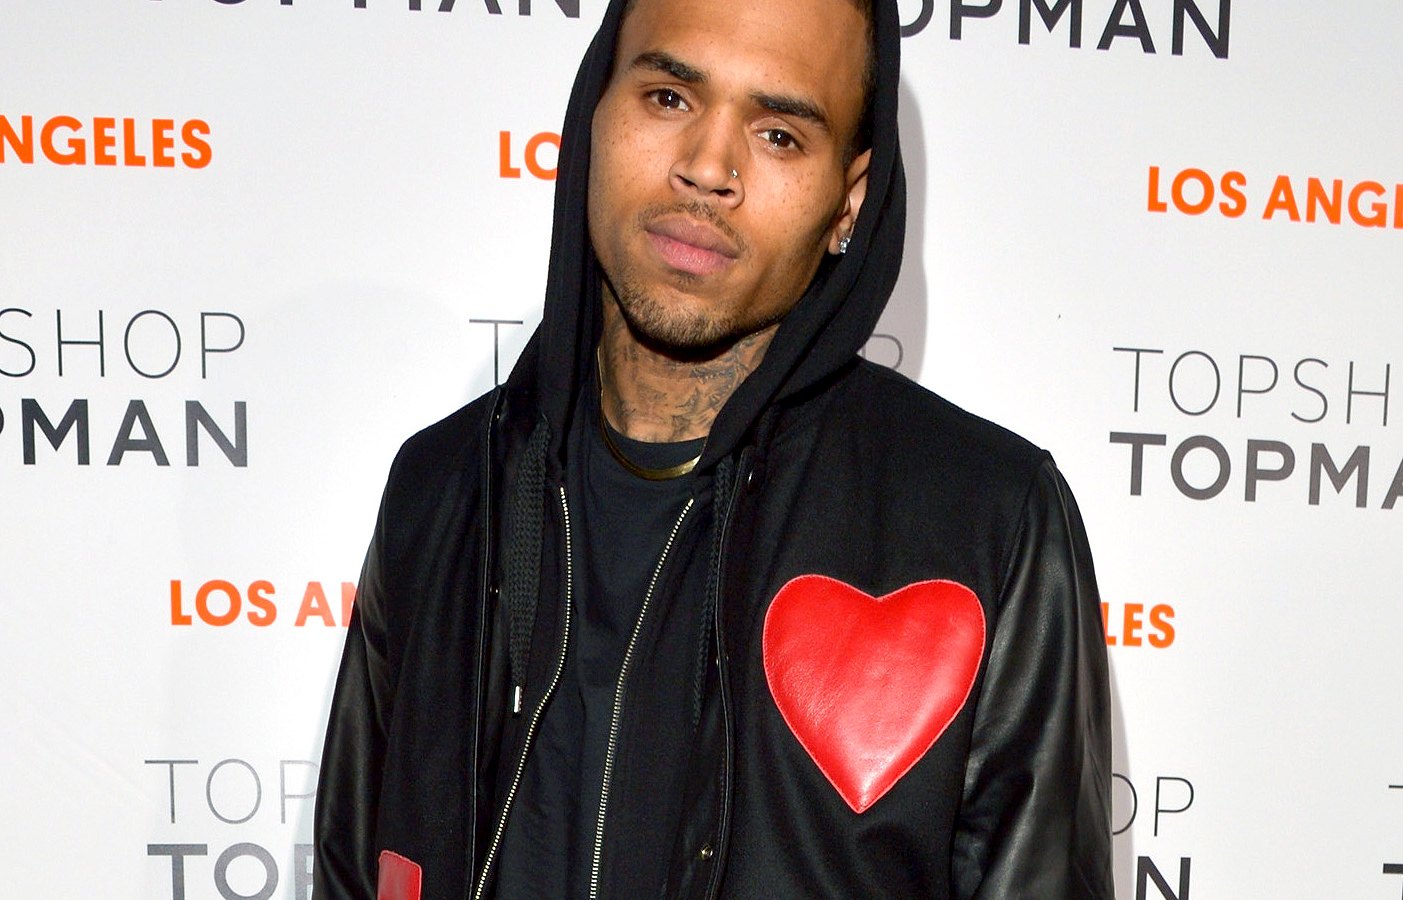 Chris Brown says that next album will probably be last